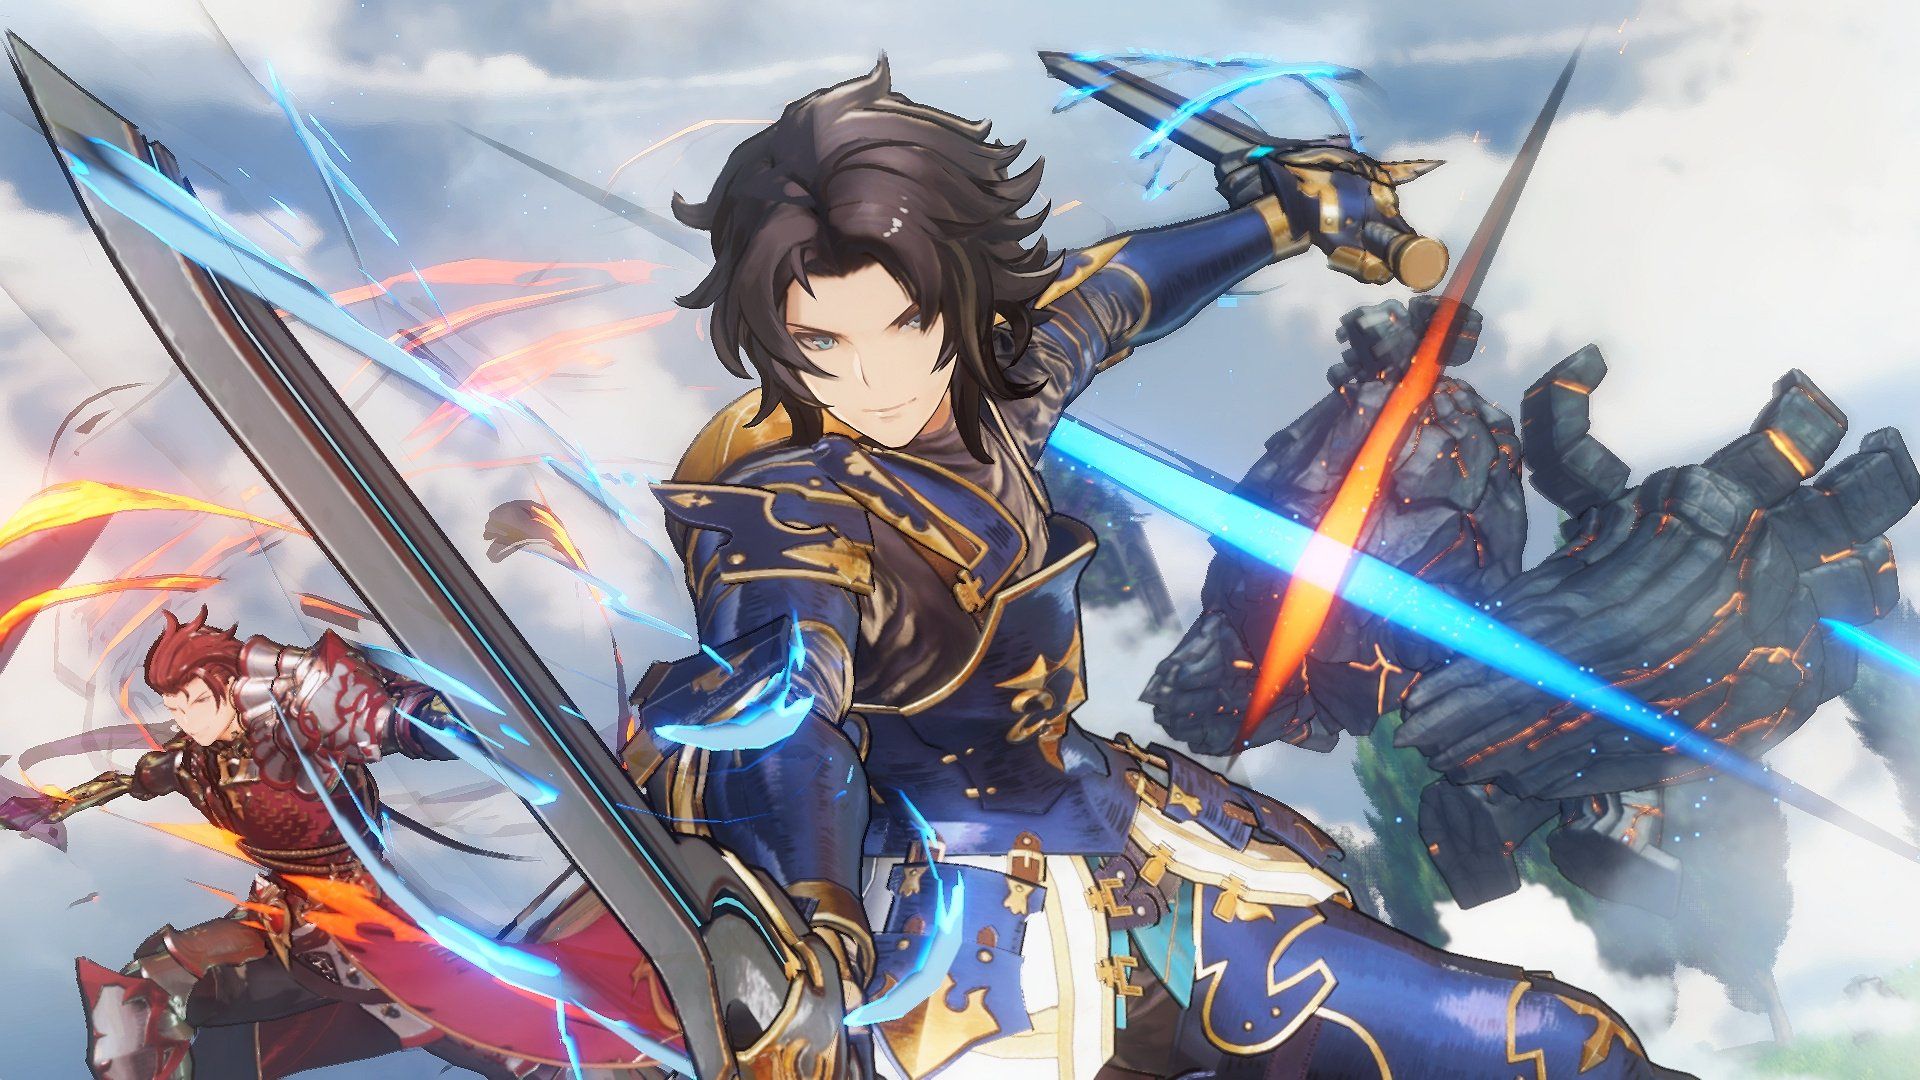 Granblue Fantasy Versus Sales Are Off to a Good Start in Japan